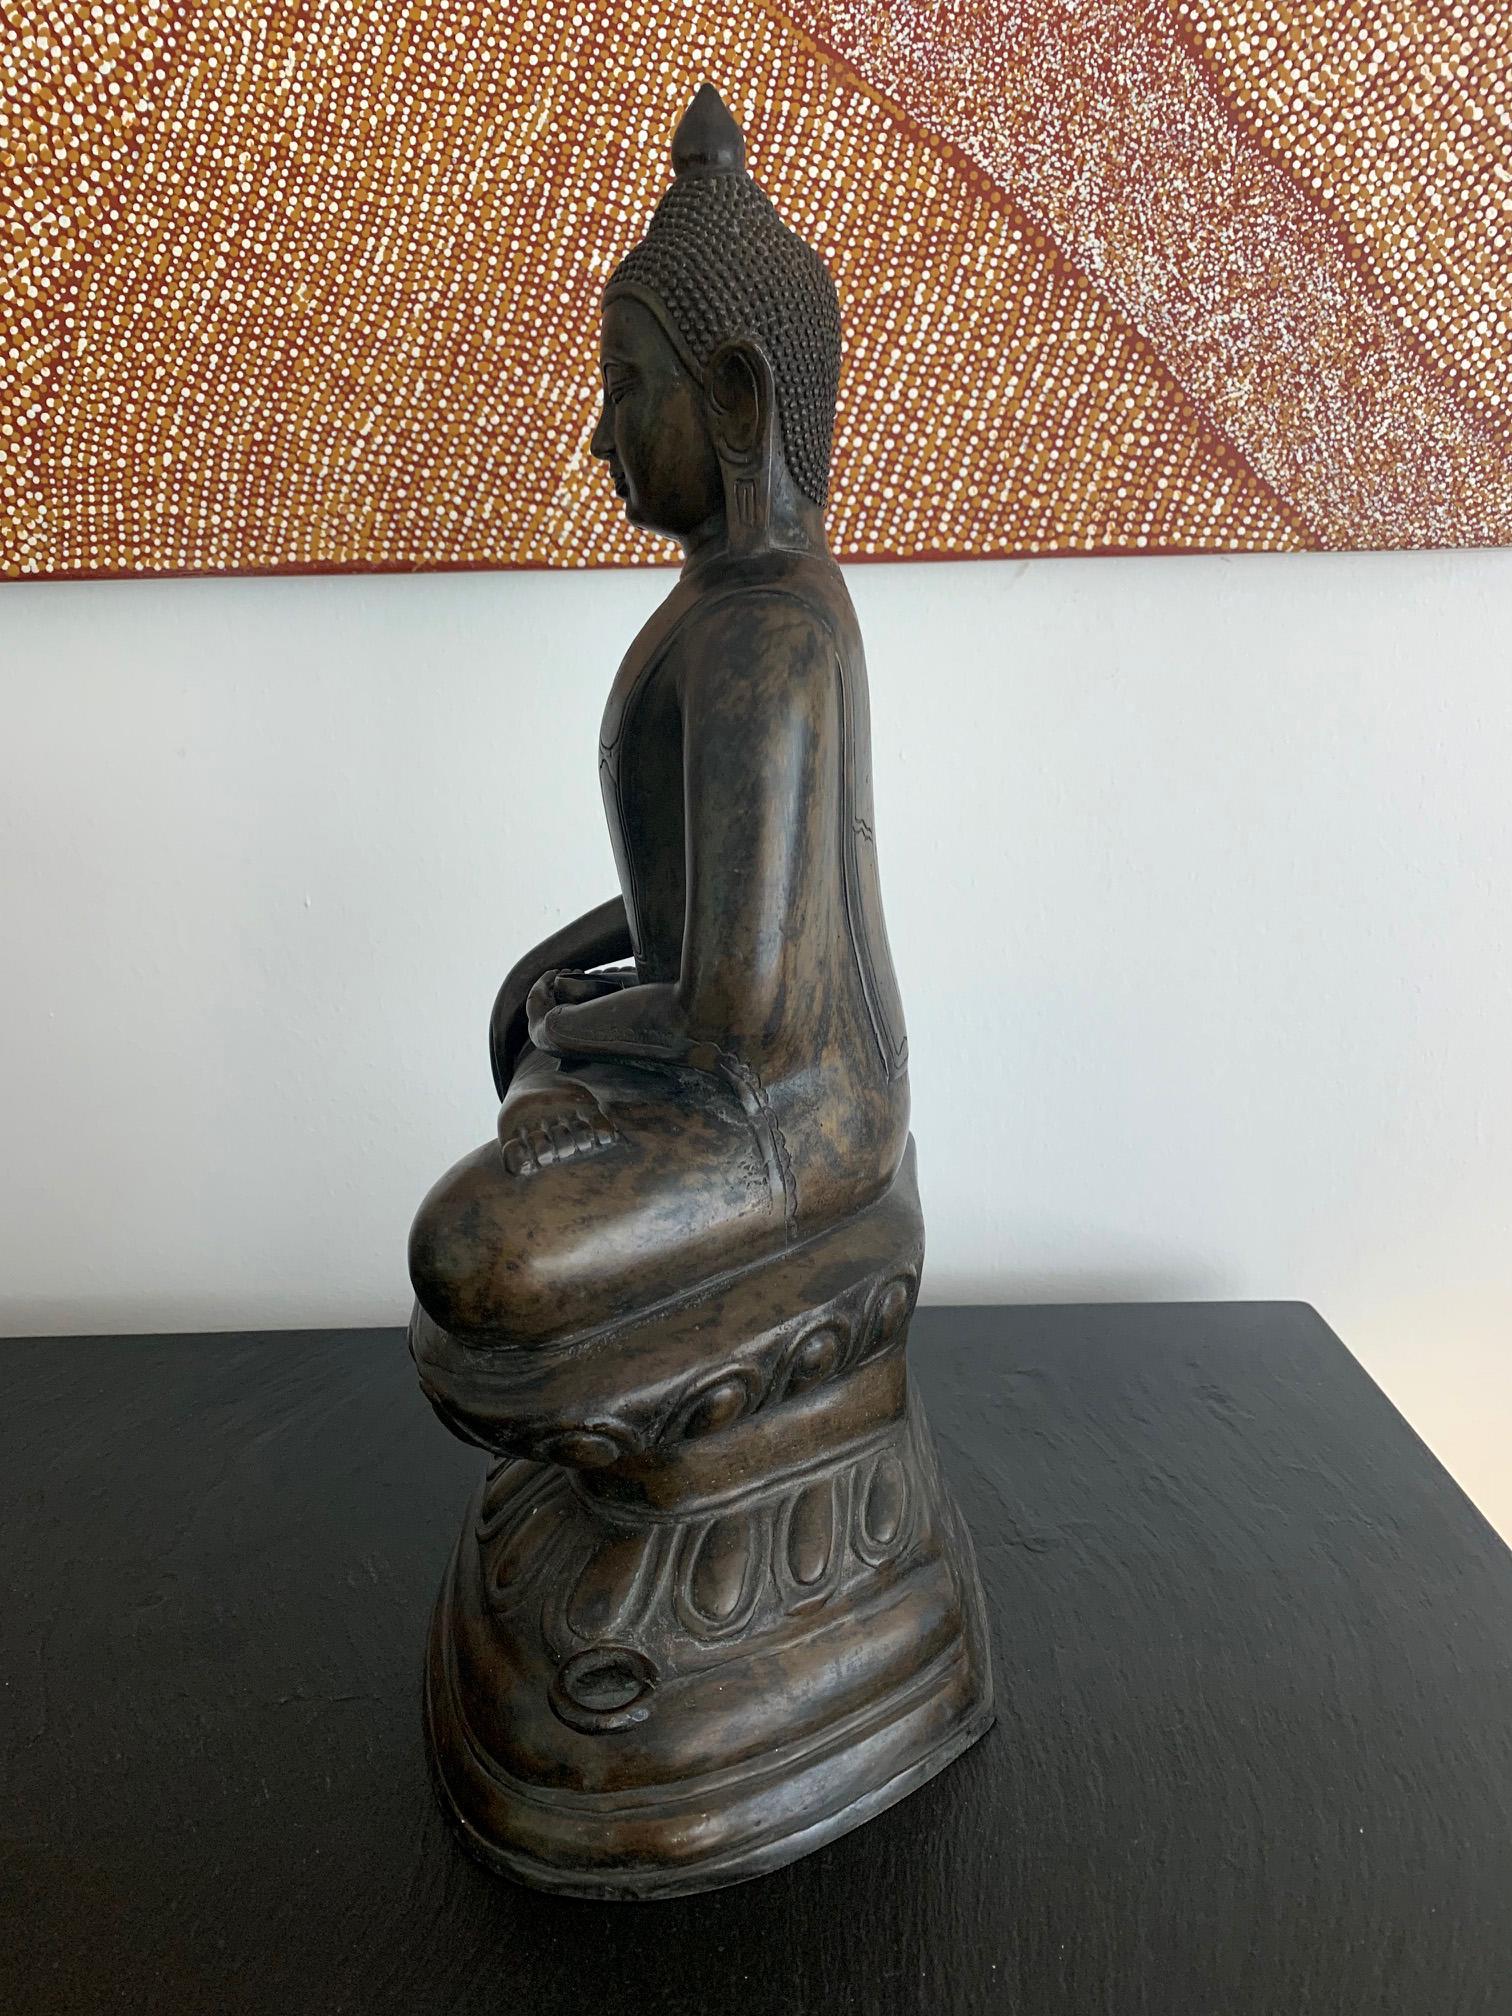 A statue of Medicine Buddha on double lotus throne cast in copper alloy in lost wax technique. Medicine Buddha is also known as Bhaisajyaguru, the Buddha of medical healing prowess, who is highly revered in Mahayana Buddhism. He is often depicted as